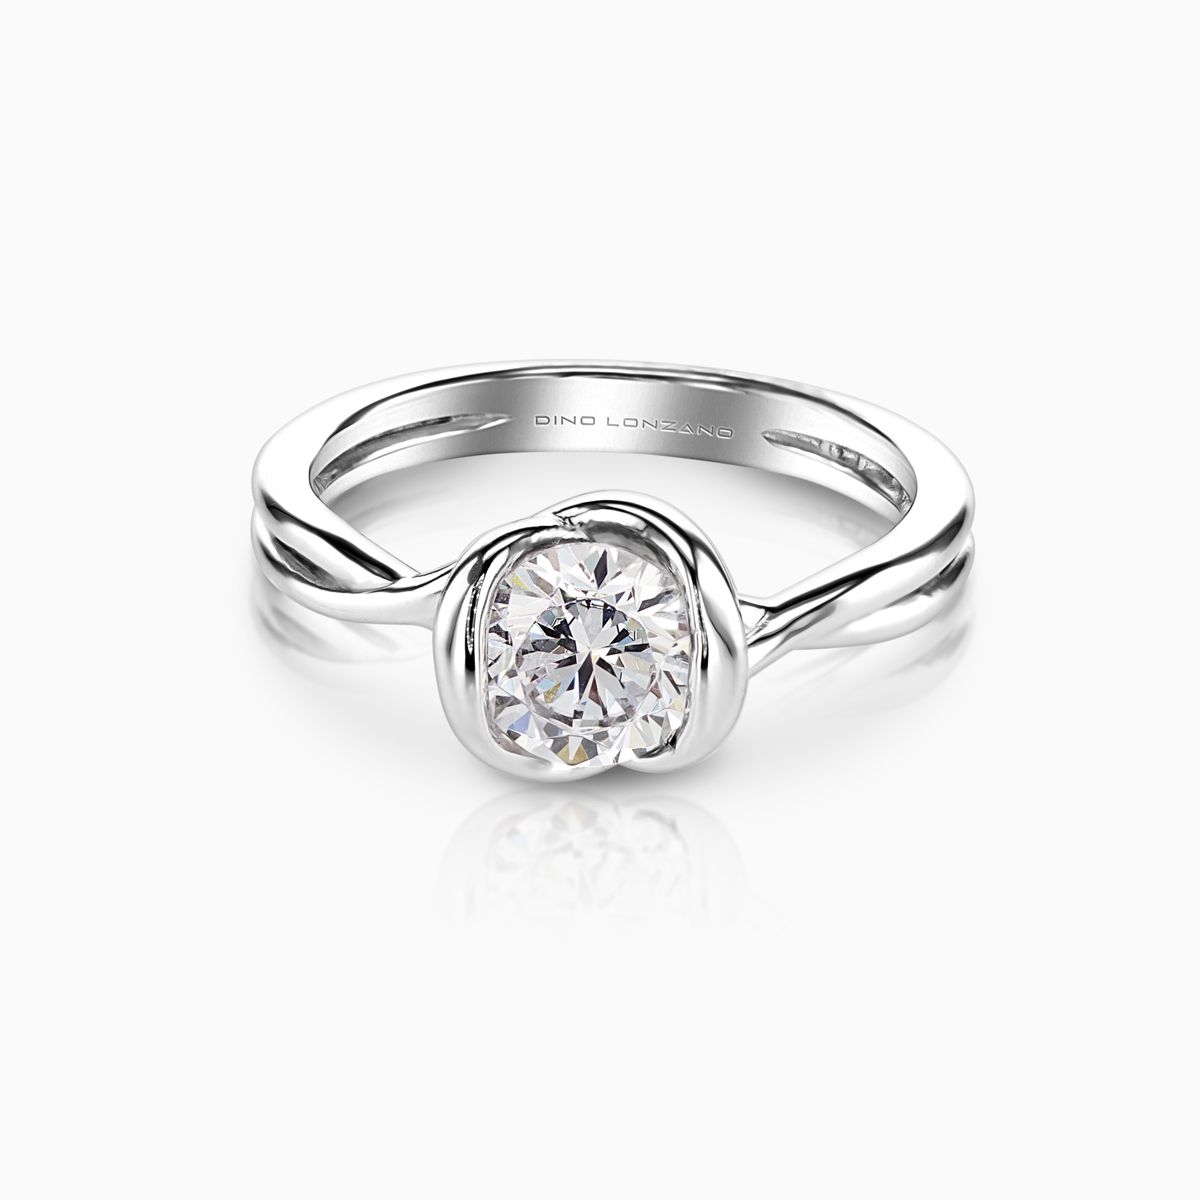 Dino Lonzano Knot Style Solitaire Engagement Ring, 18k White Gold